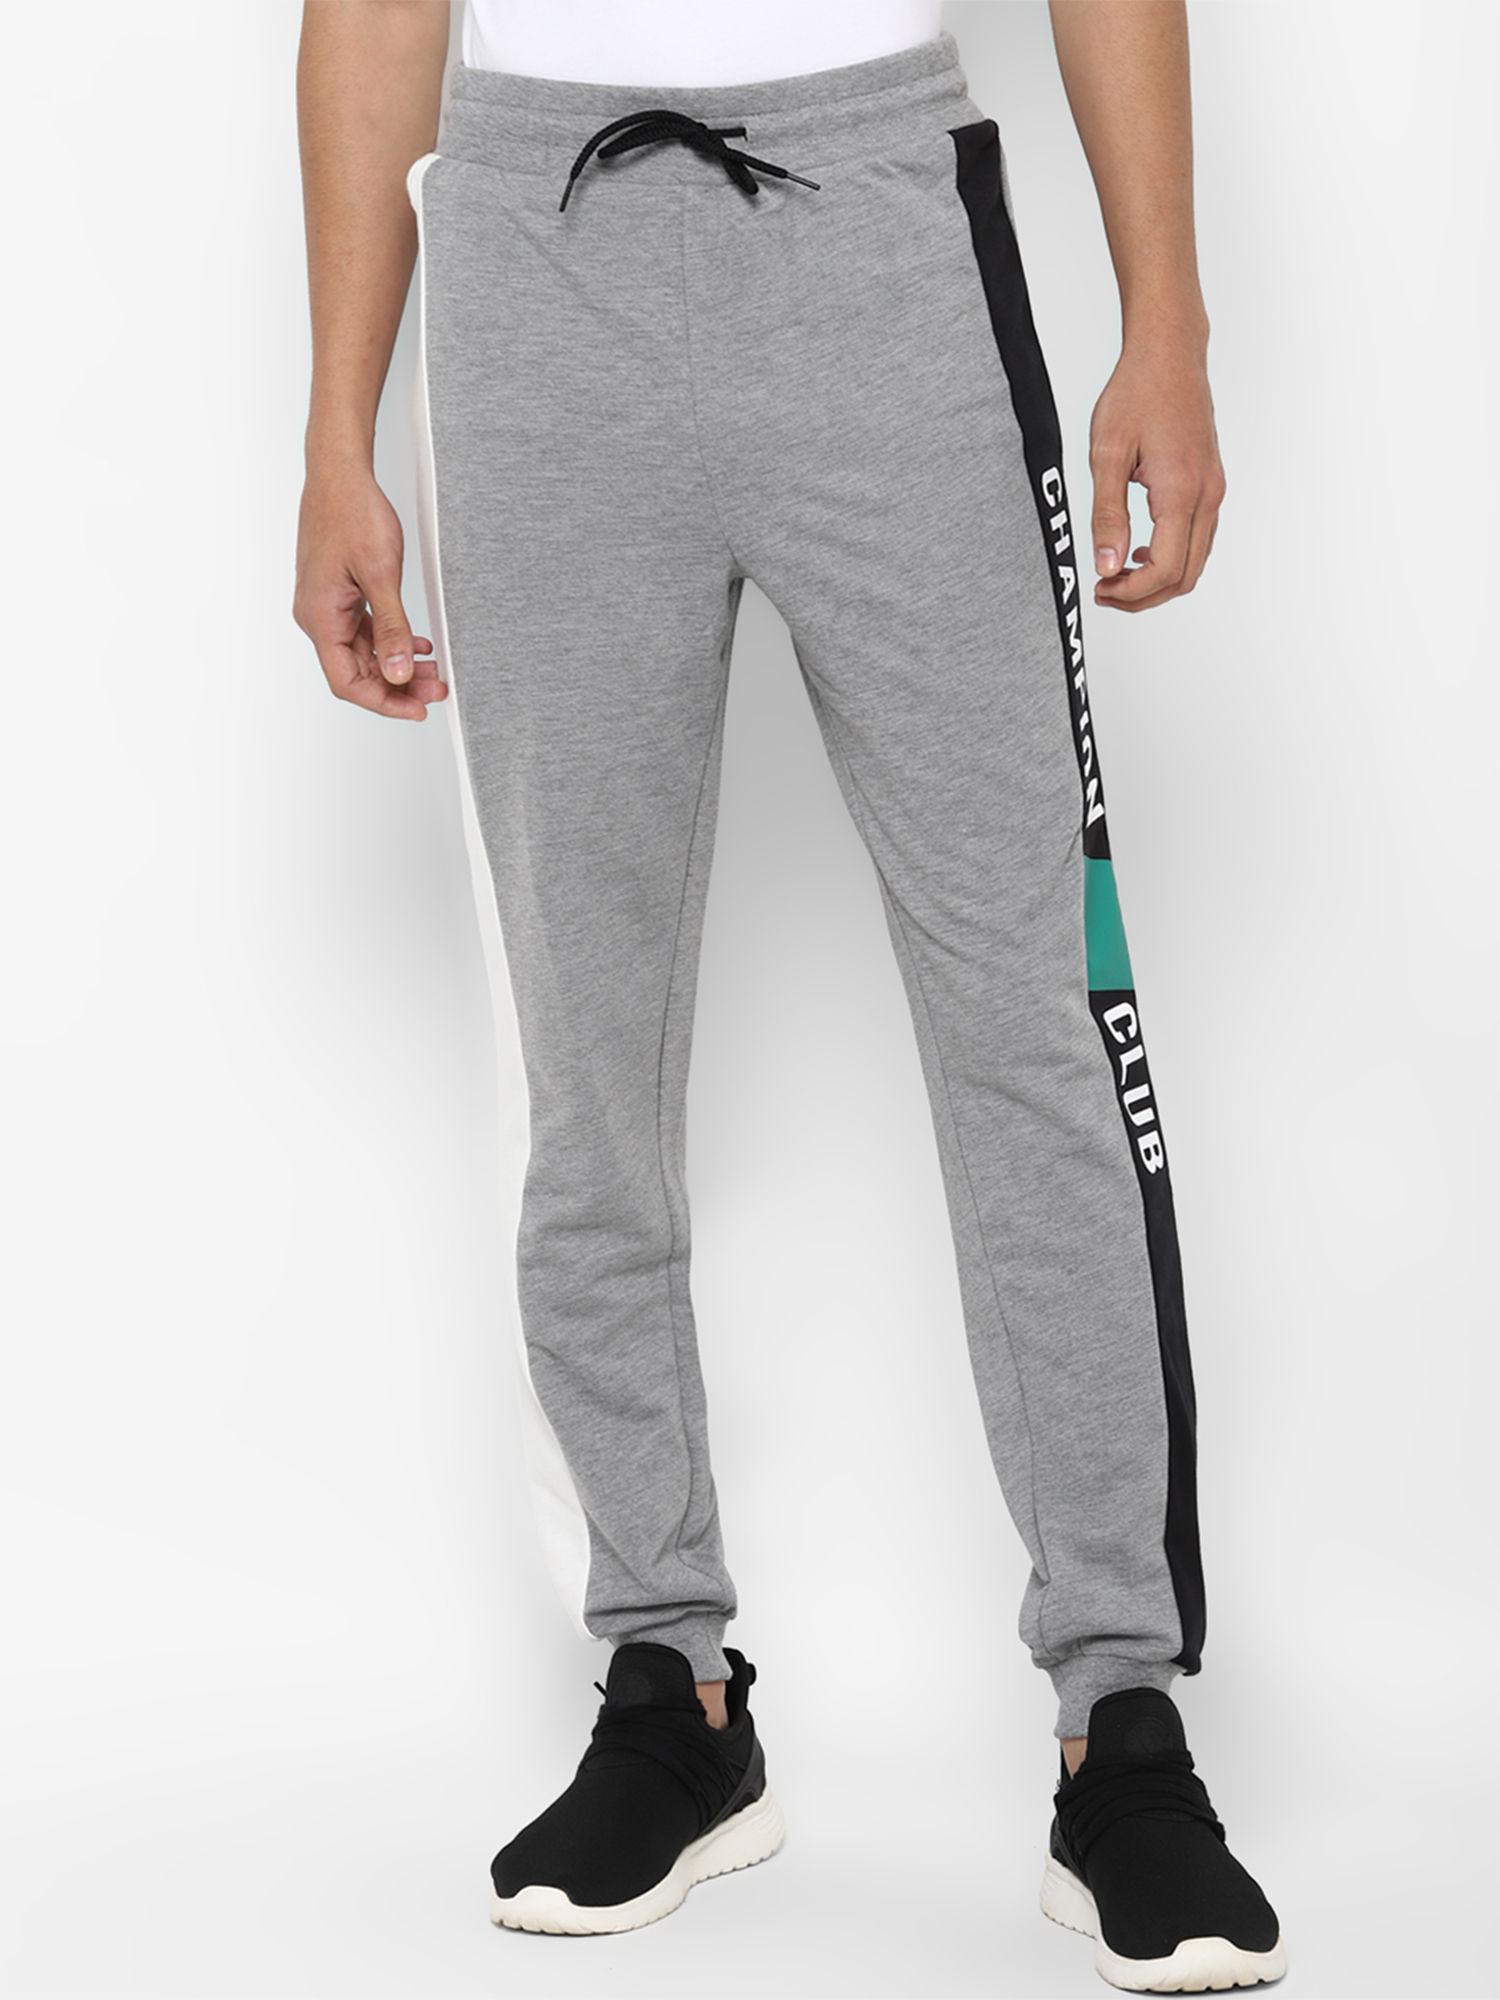 grey embroidered side-striped fleece sweatpants